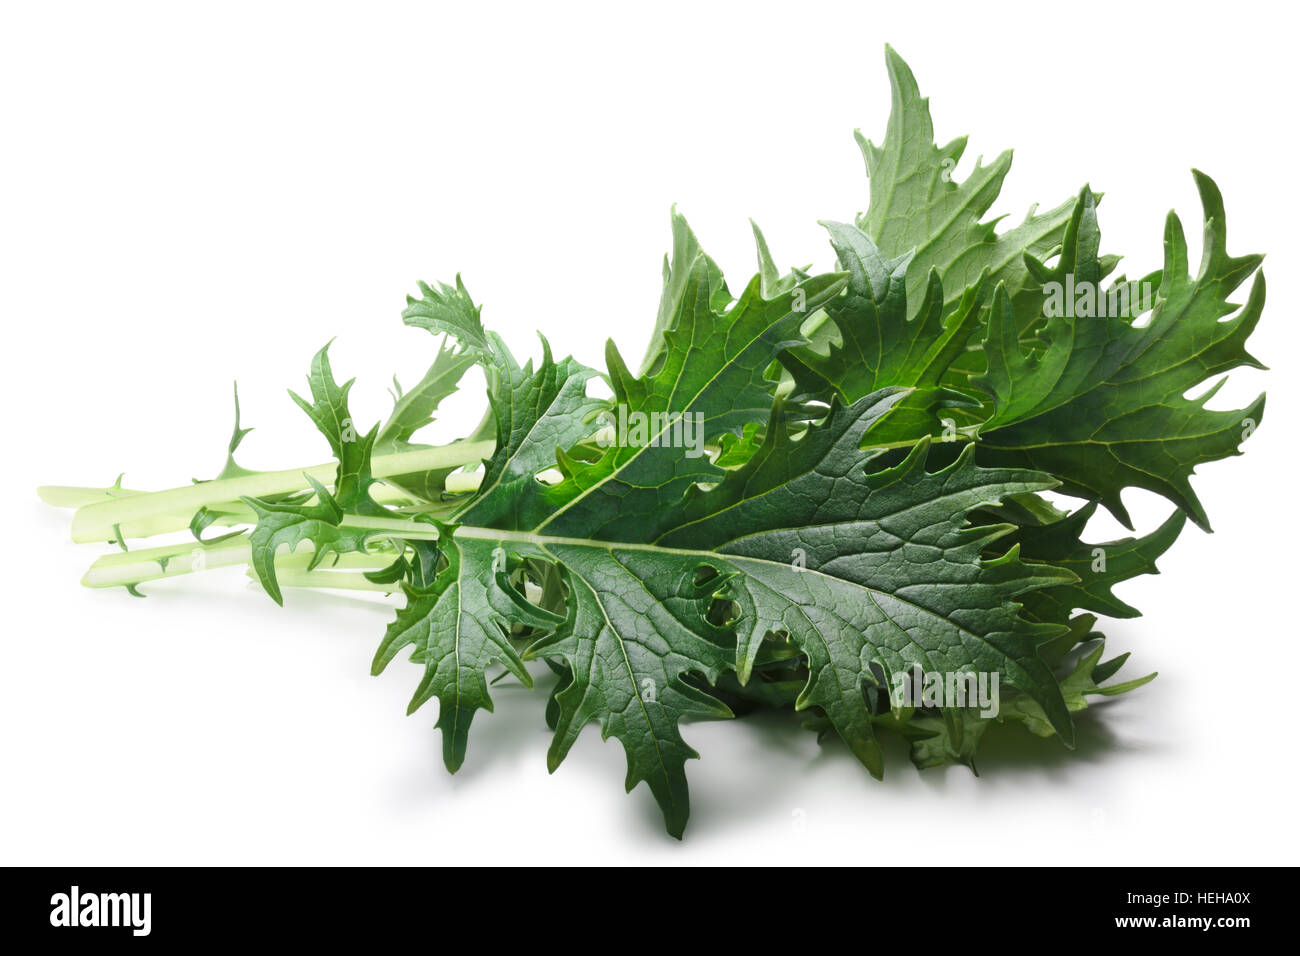 Bunch of Mizuna (Japanese mustard) leafy green salad. Brassica rapa nipponsinica cultivated variety. Clipping paths, shadow separated Stock Photo